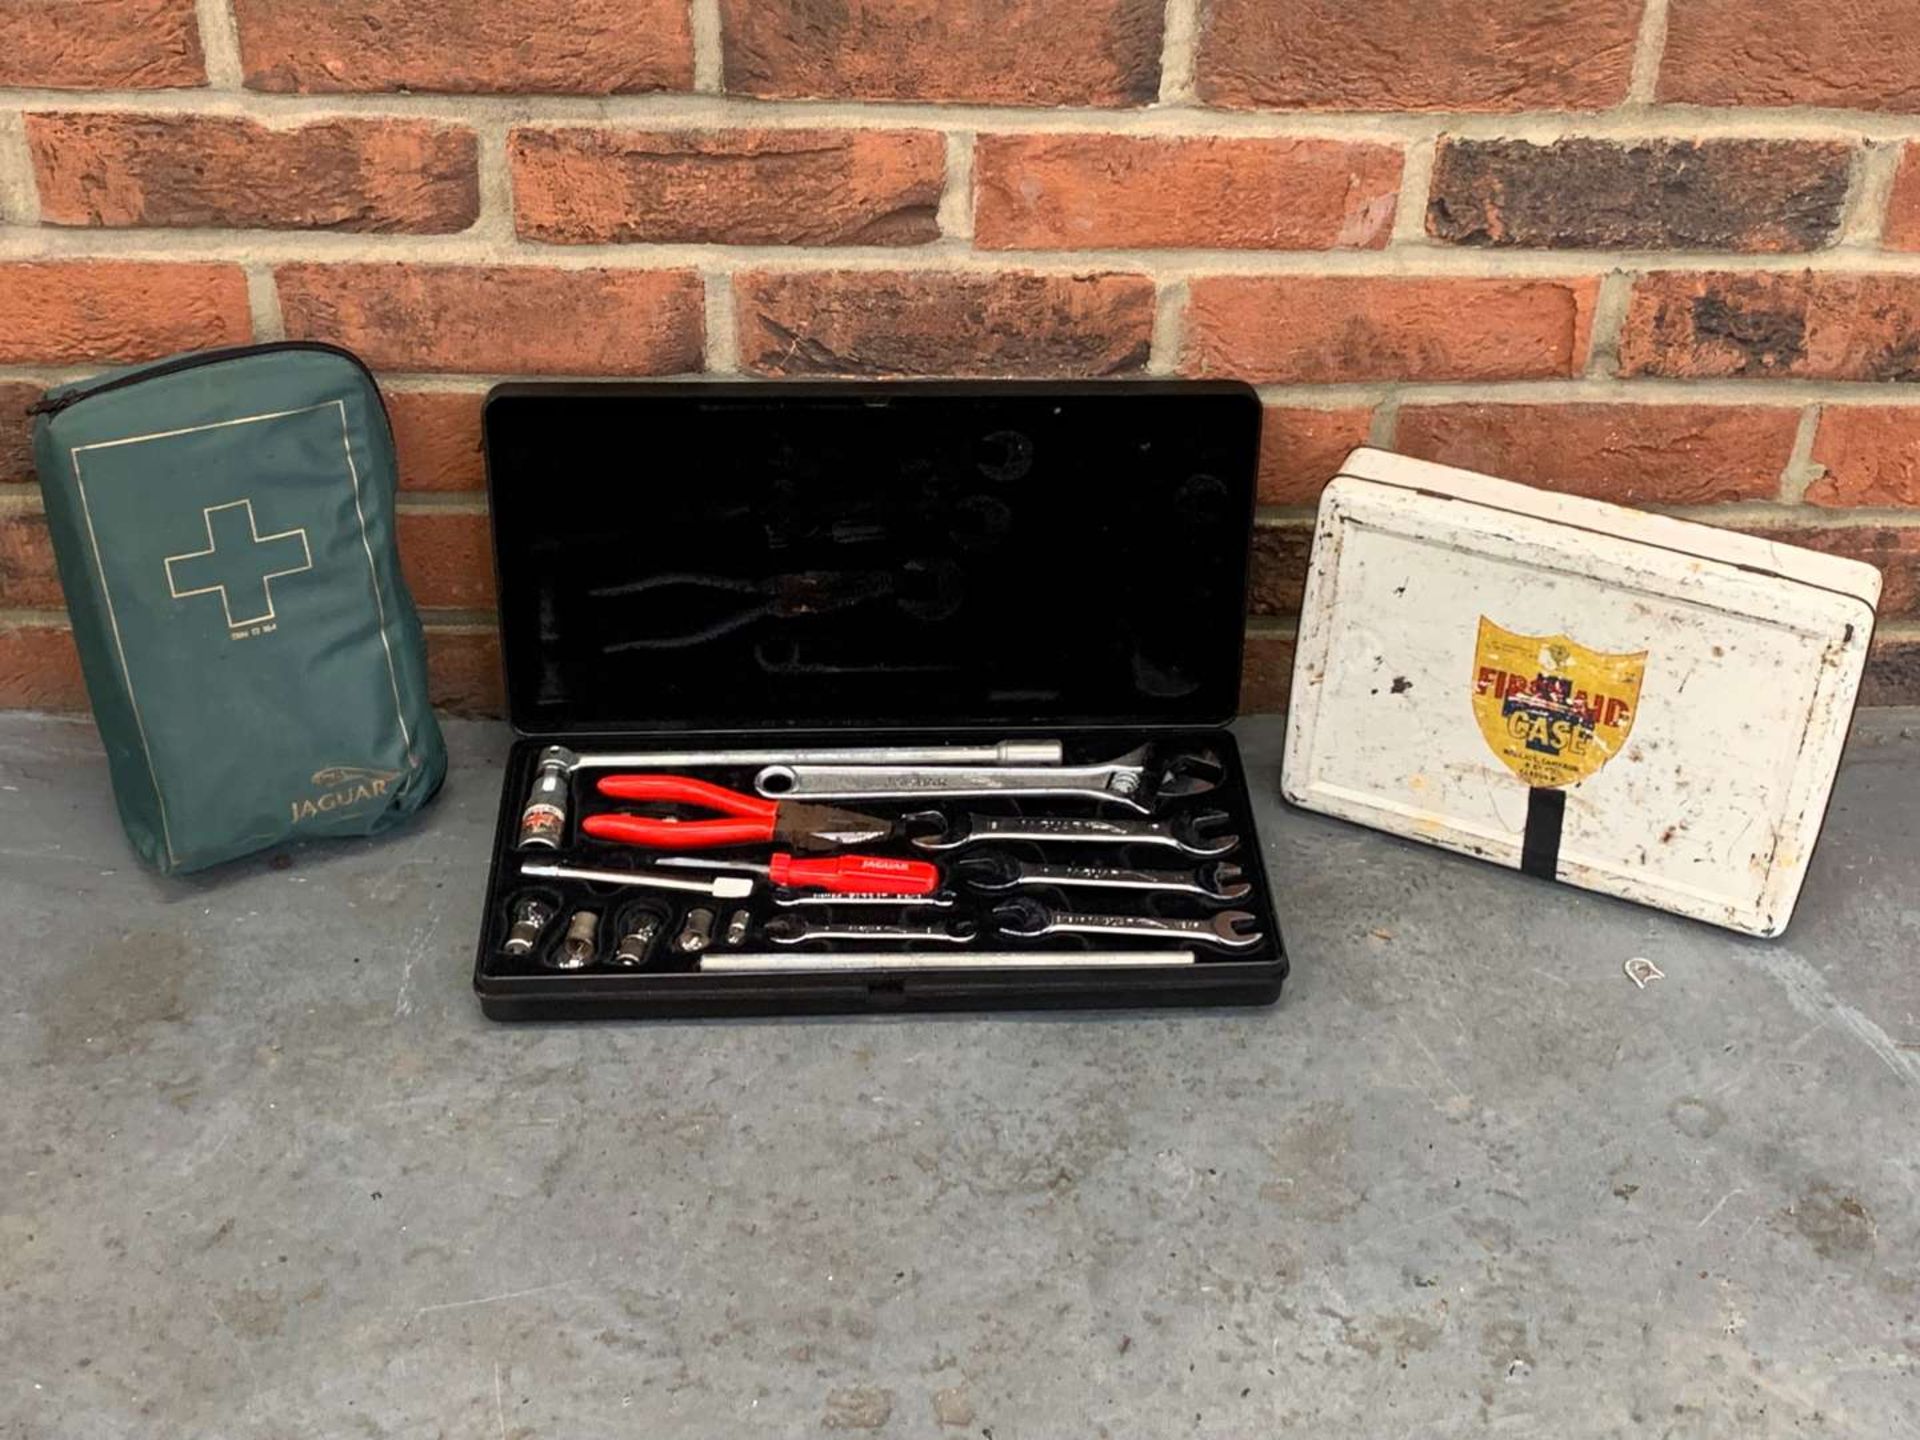 Jaguar Tool Kit, First Aid Case and One Other